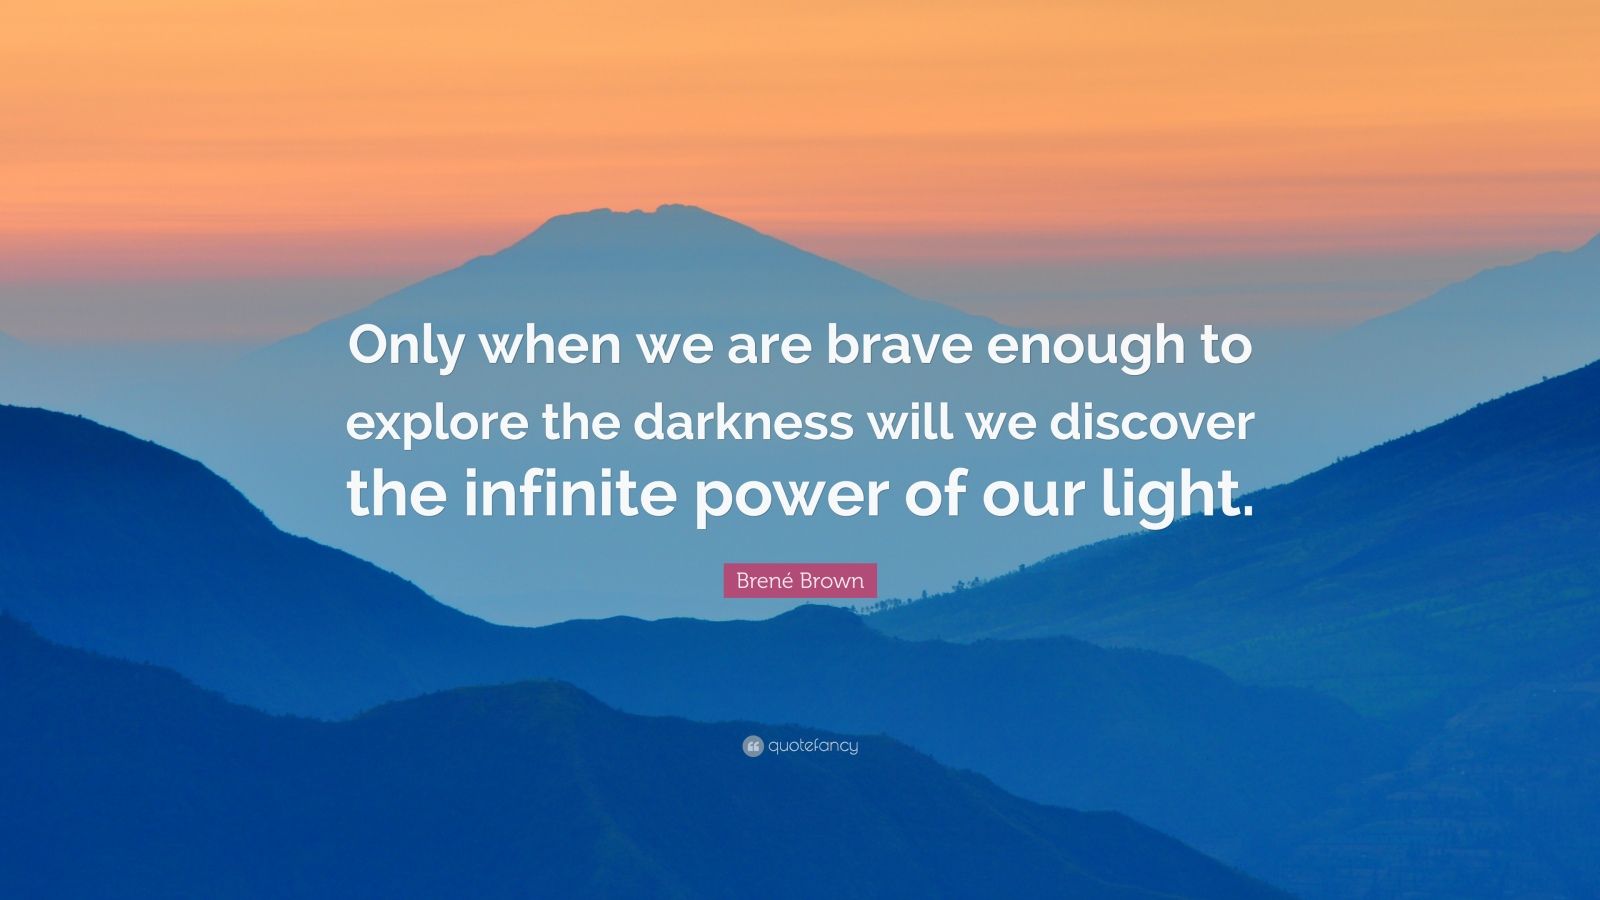 Brené Brown Quote: “Only when we are brave enough to explore the